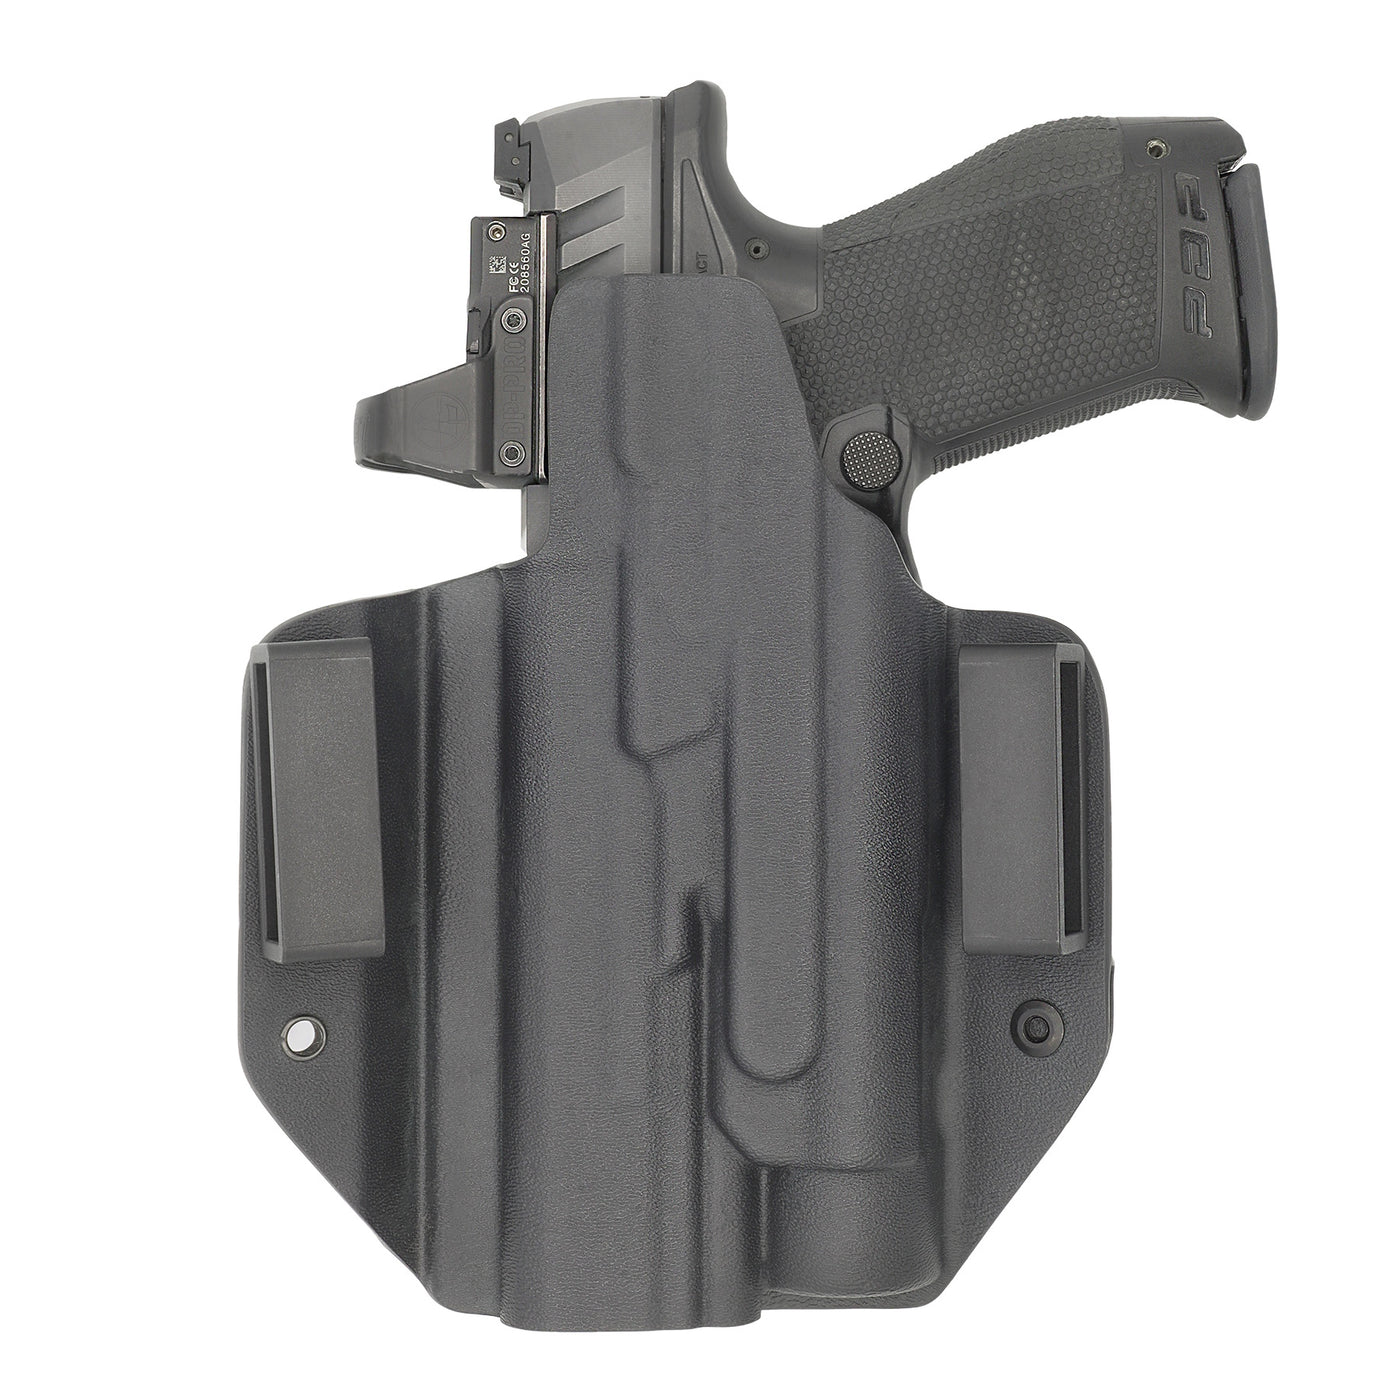 C&G Holsters Custom OWB Tactical FN 509 Streamlight TLR1 in holstered position back view